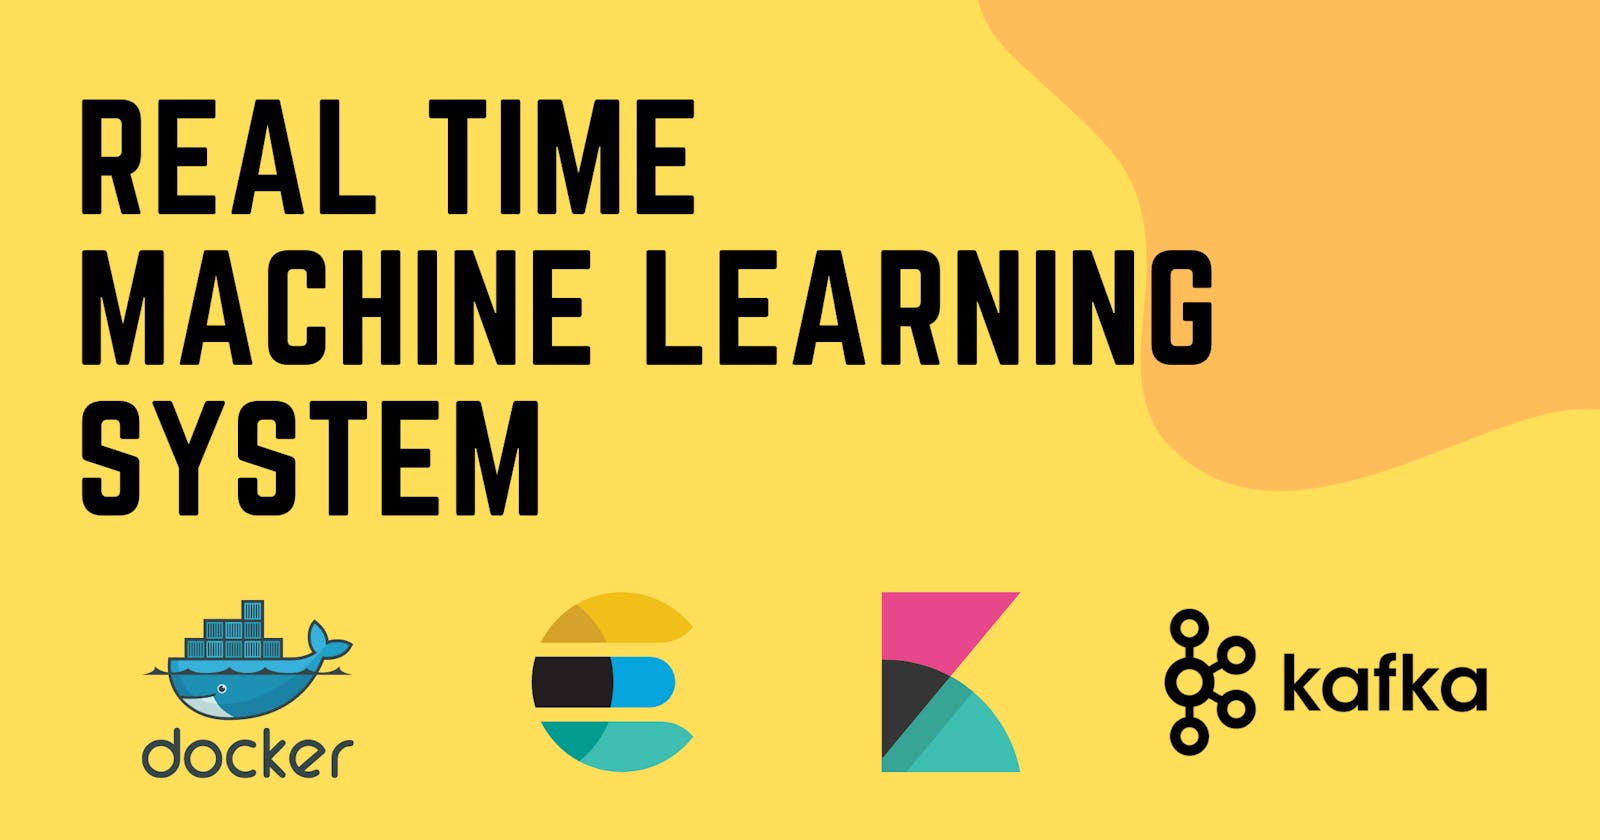 How I built a real-time Machine Learning system with Kafka, Elasticsearch, Kibana, and Docker